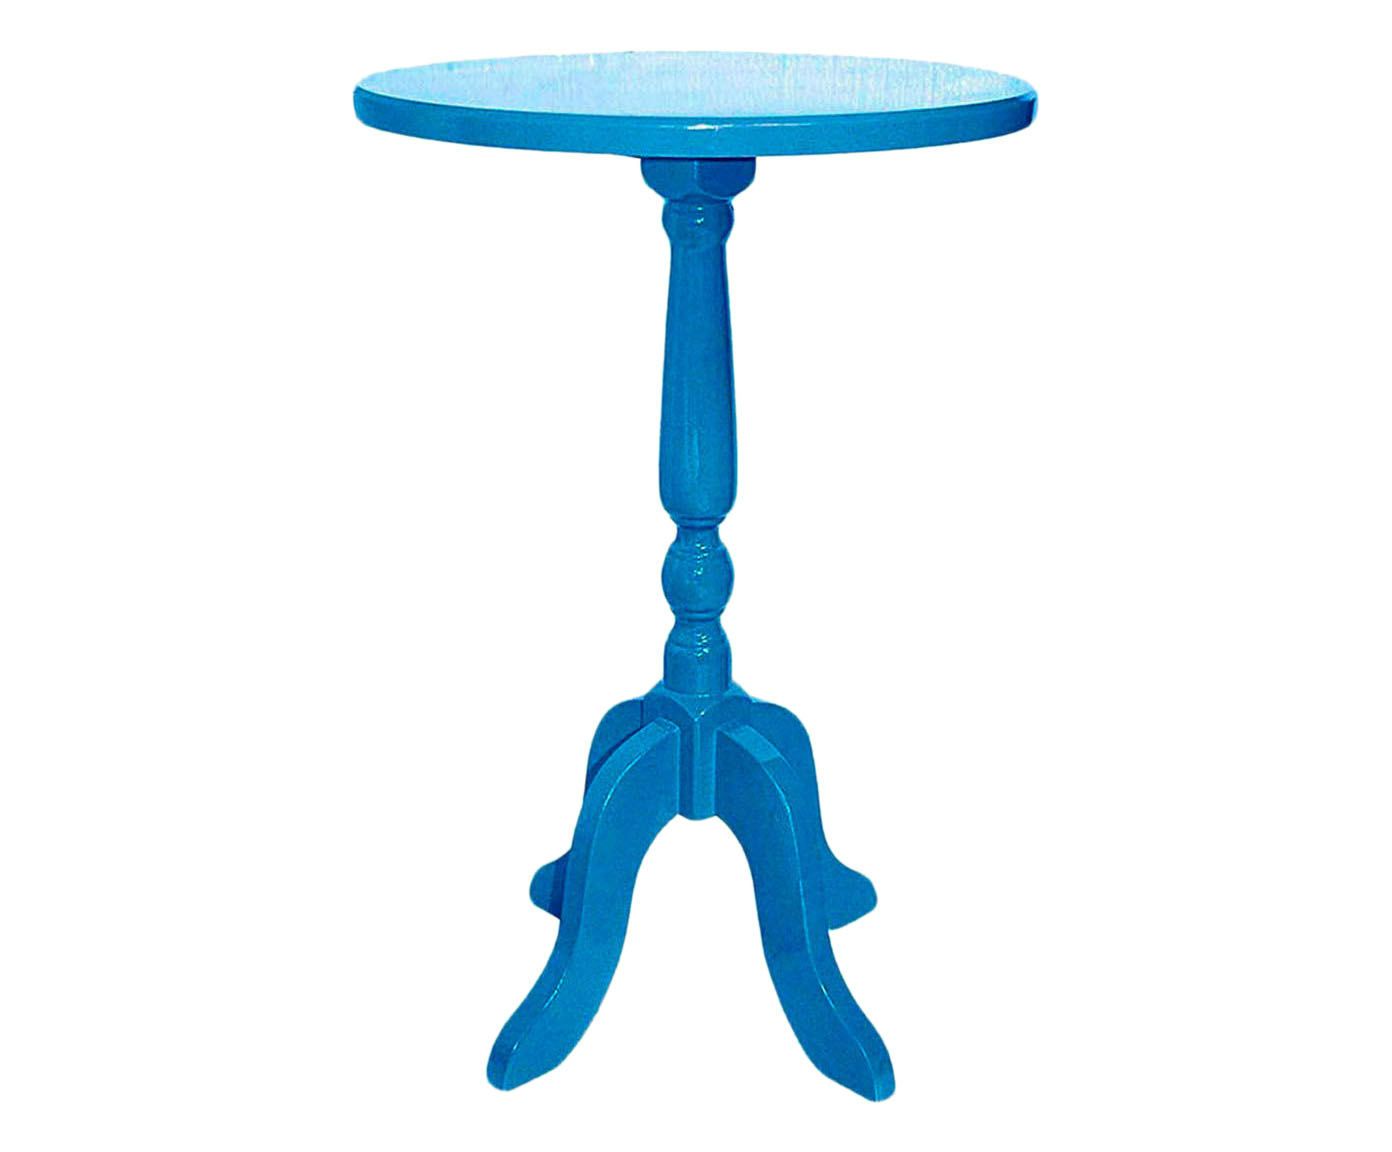 MESA LATERAL CLASSIC CHARM - AZUL | Westwing.com.br